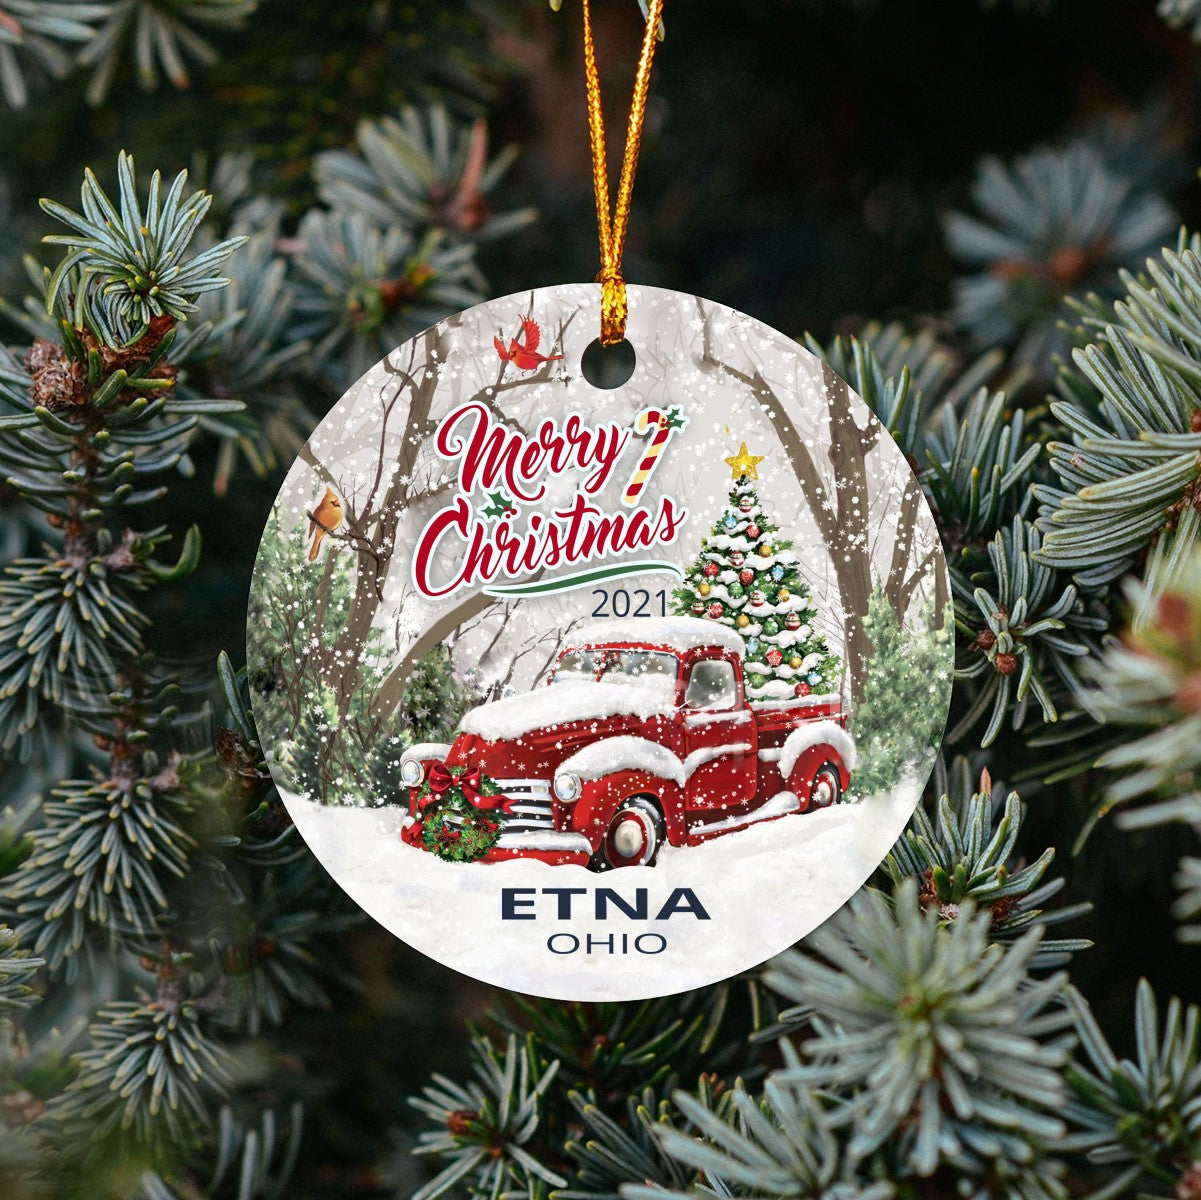 Christmas Tree Ornaments Etna - Ornament With Name City, State Etna Ohio OH Ornament - Red Truck Xmas Ornaments 3'' Plastic Gift For Family, Friend And Housewarming